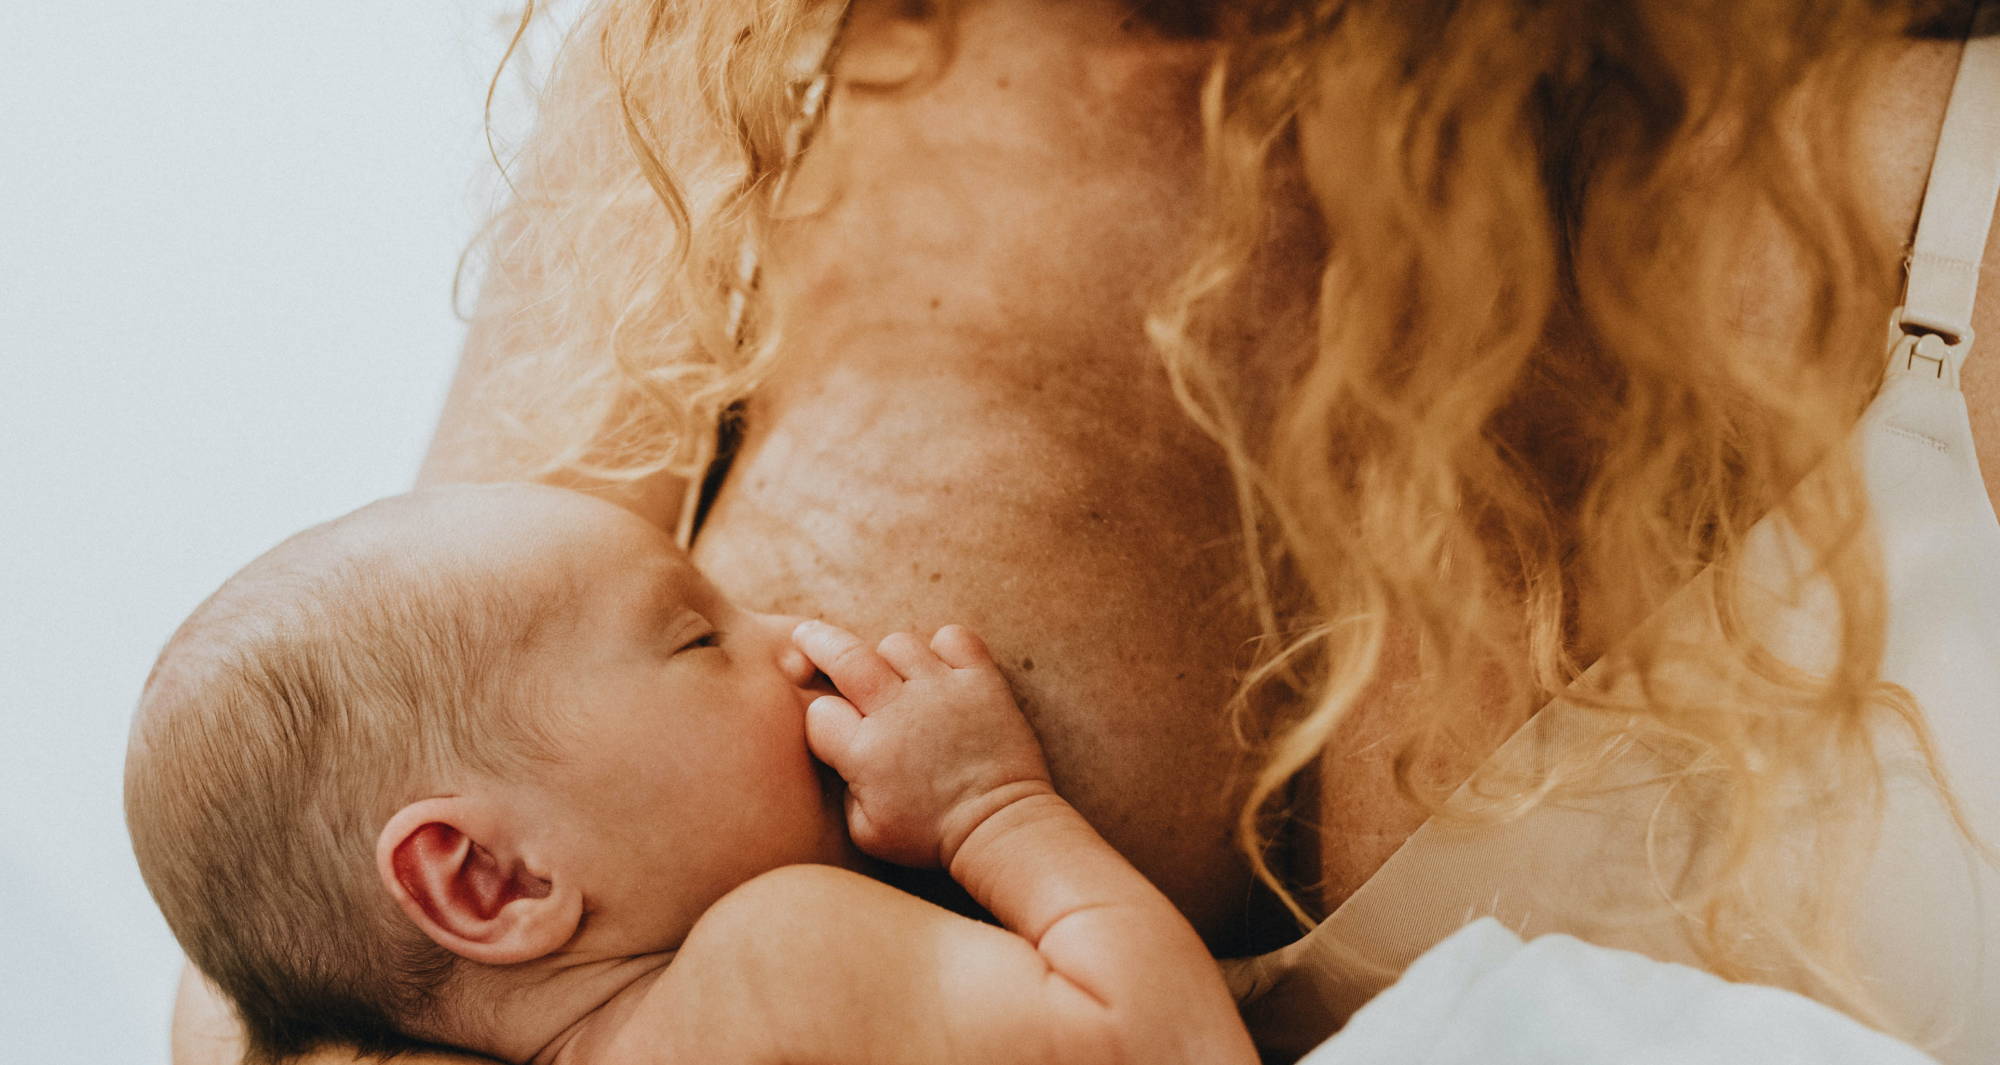  A woman with curly blond hair wearing a beige bra breastfeeds an infant.